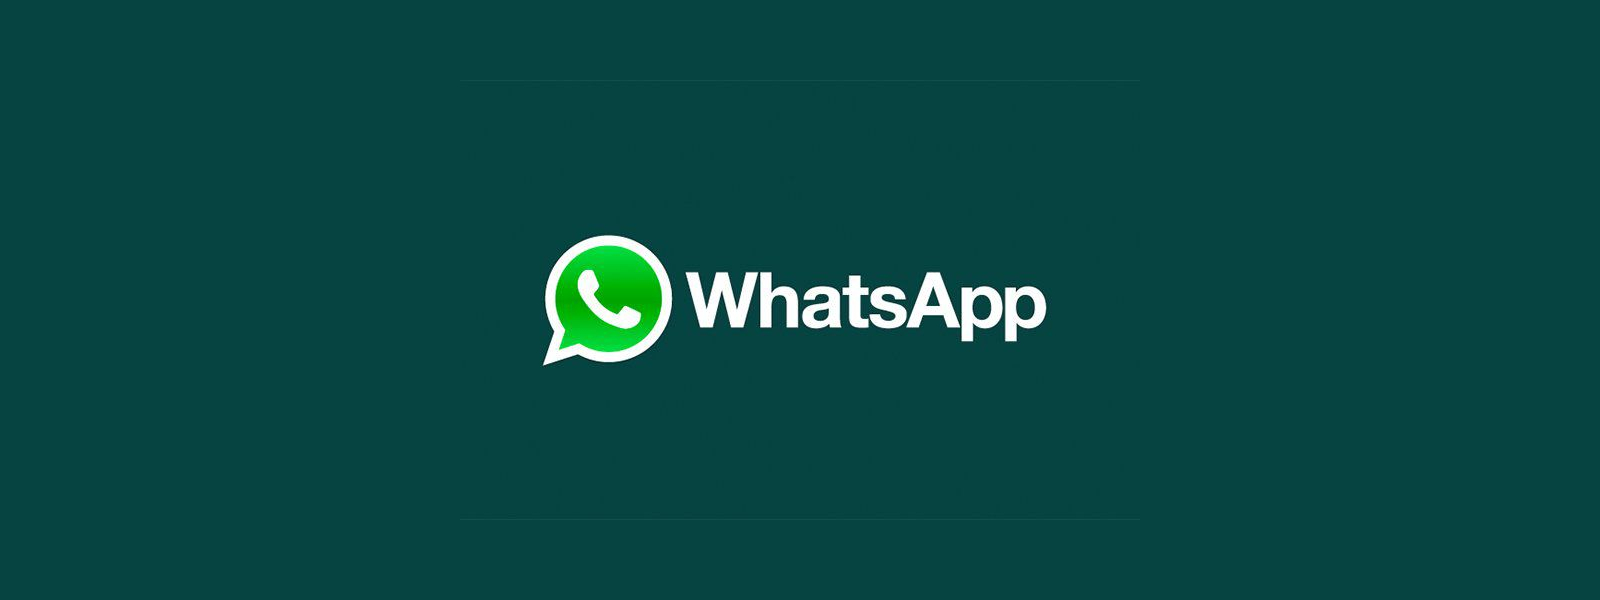 WhatsApp will stop working on 49 old phone models from 31st Dec.